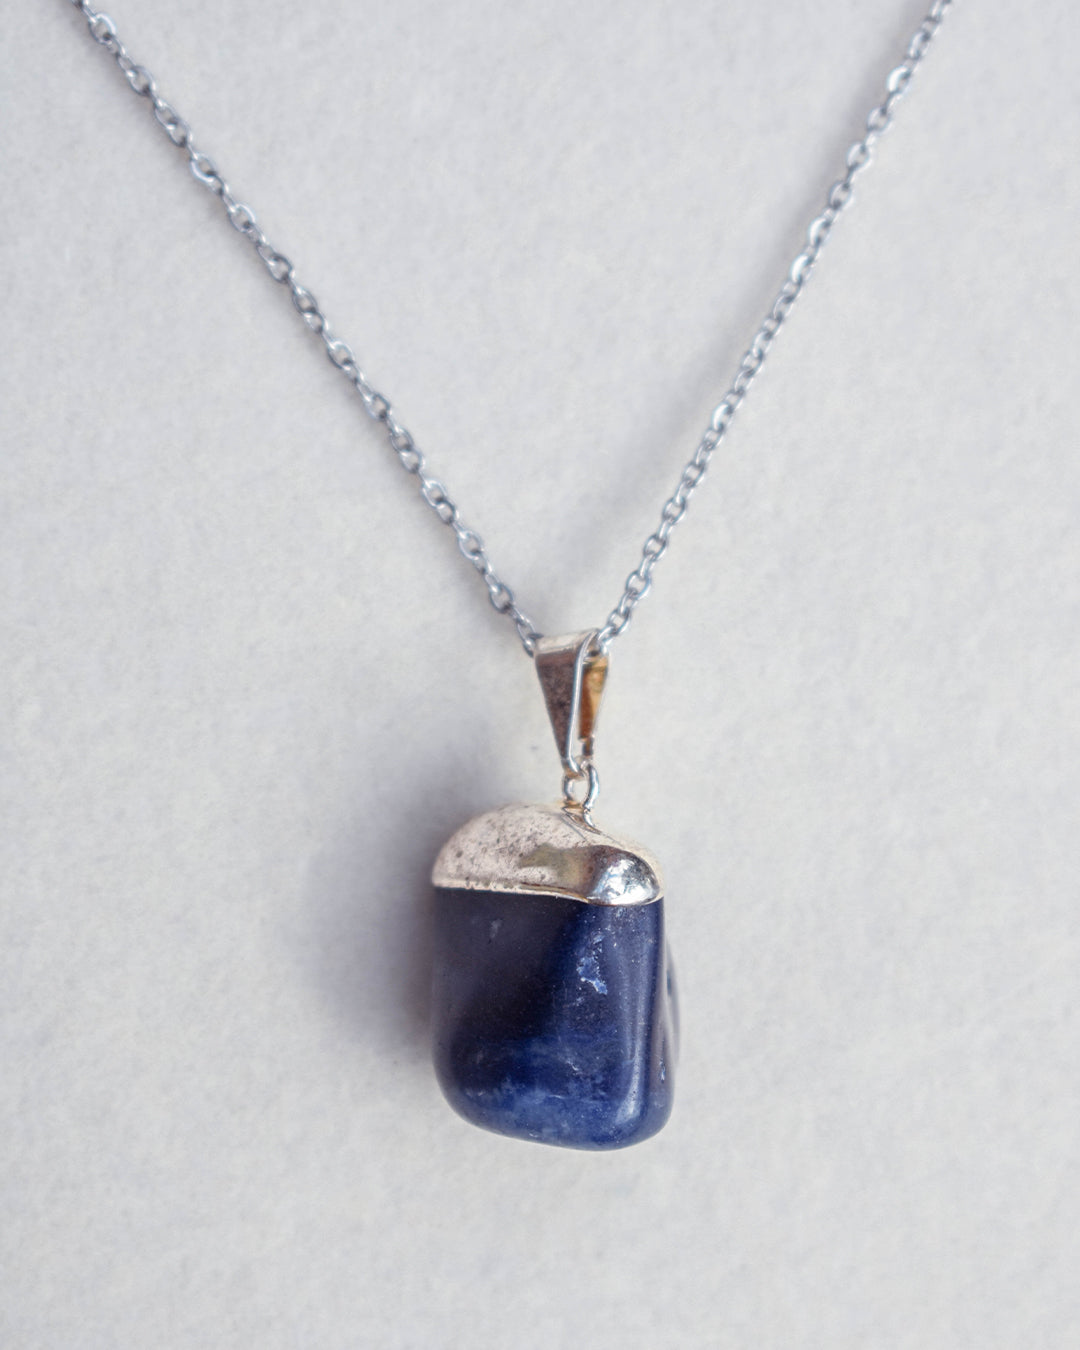 Stainless Steel chain with Sodalite crystal pendant